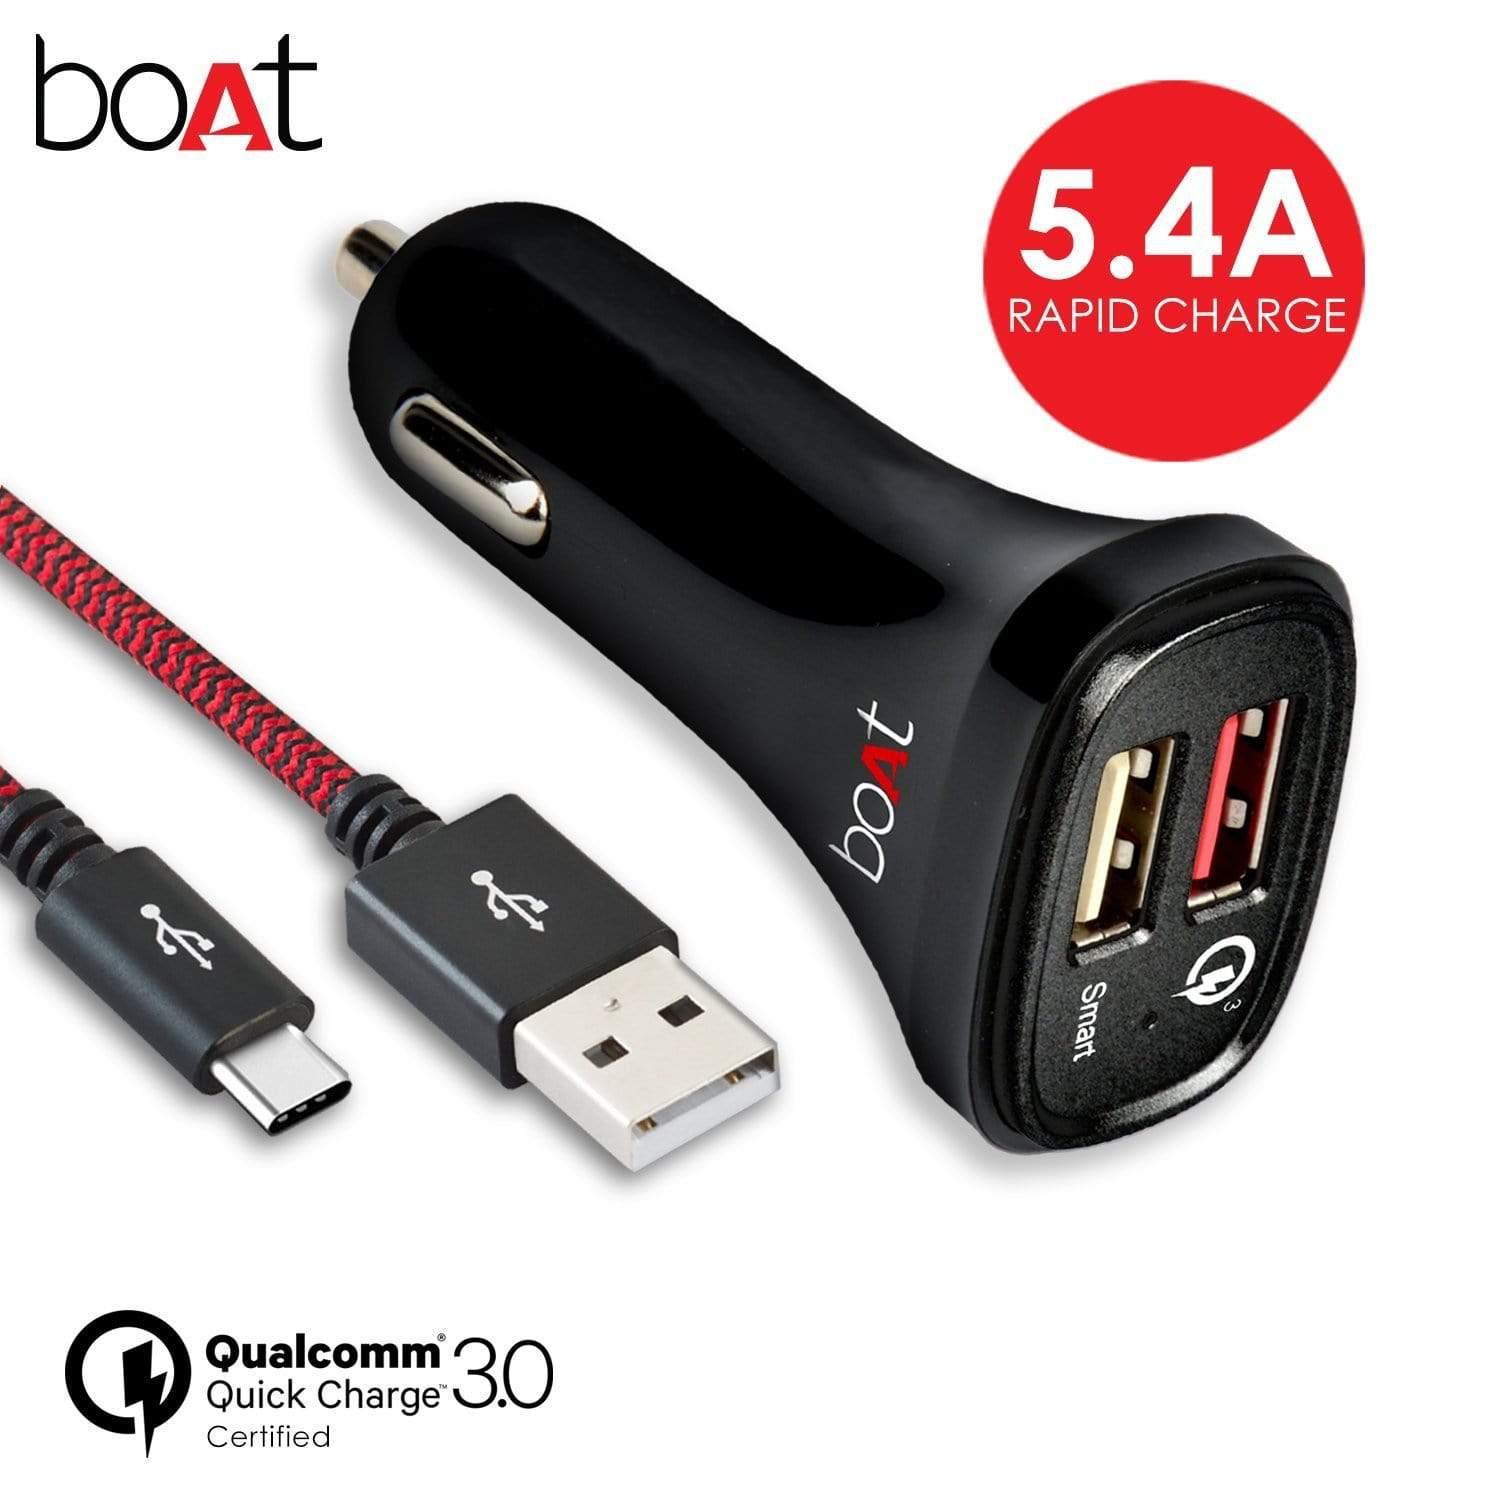 boAt Dual Port Rapid Car Charger with Quick Charge 3.0 Micro USB Cable